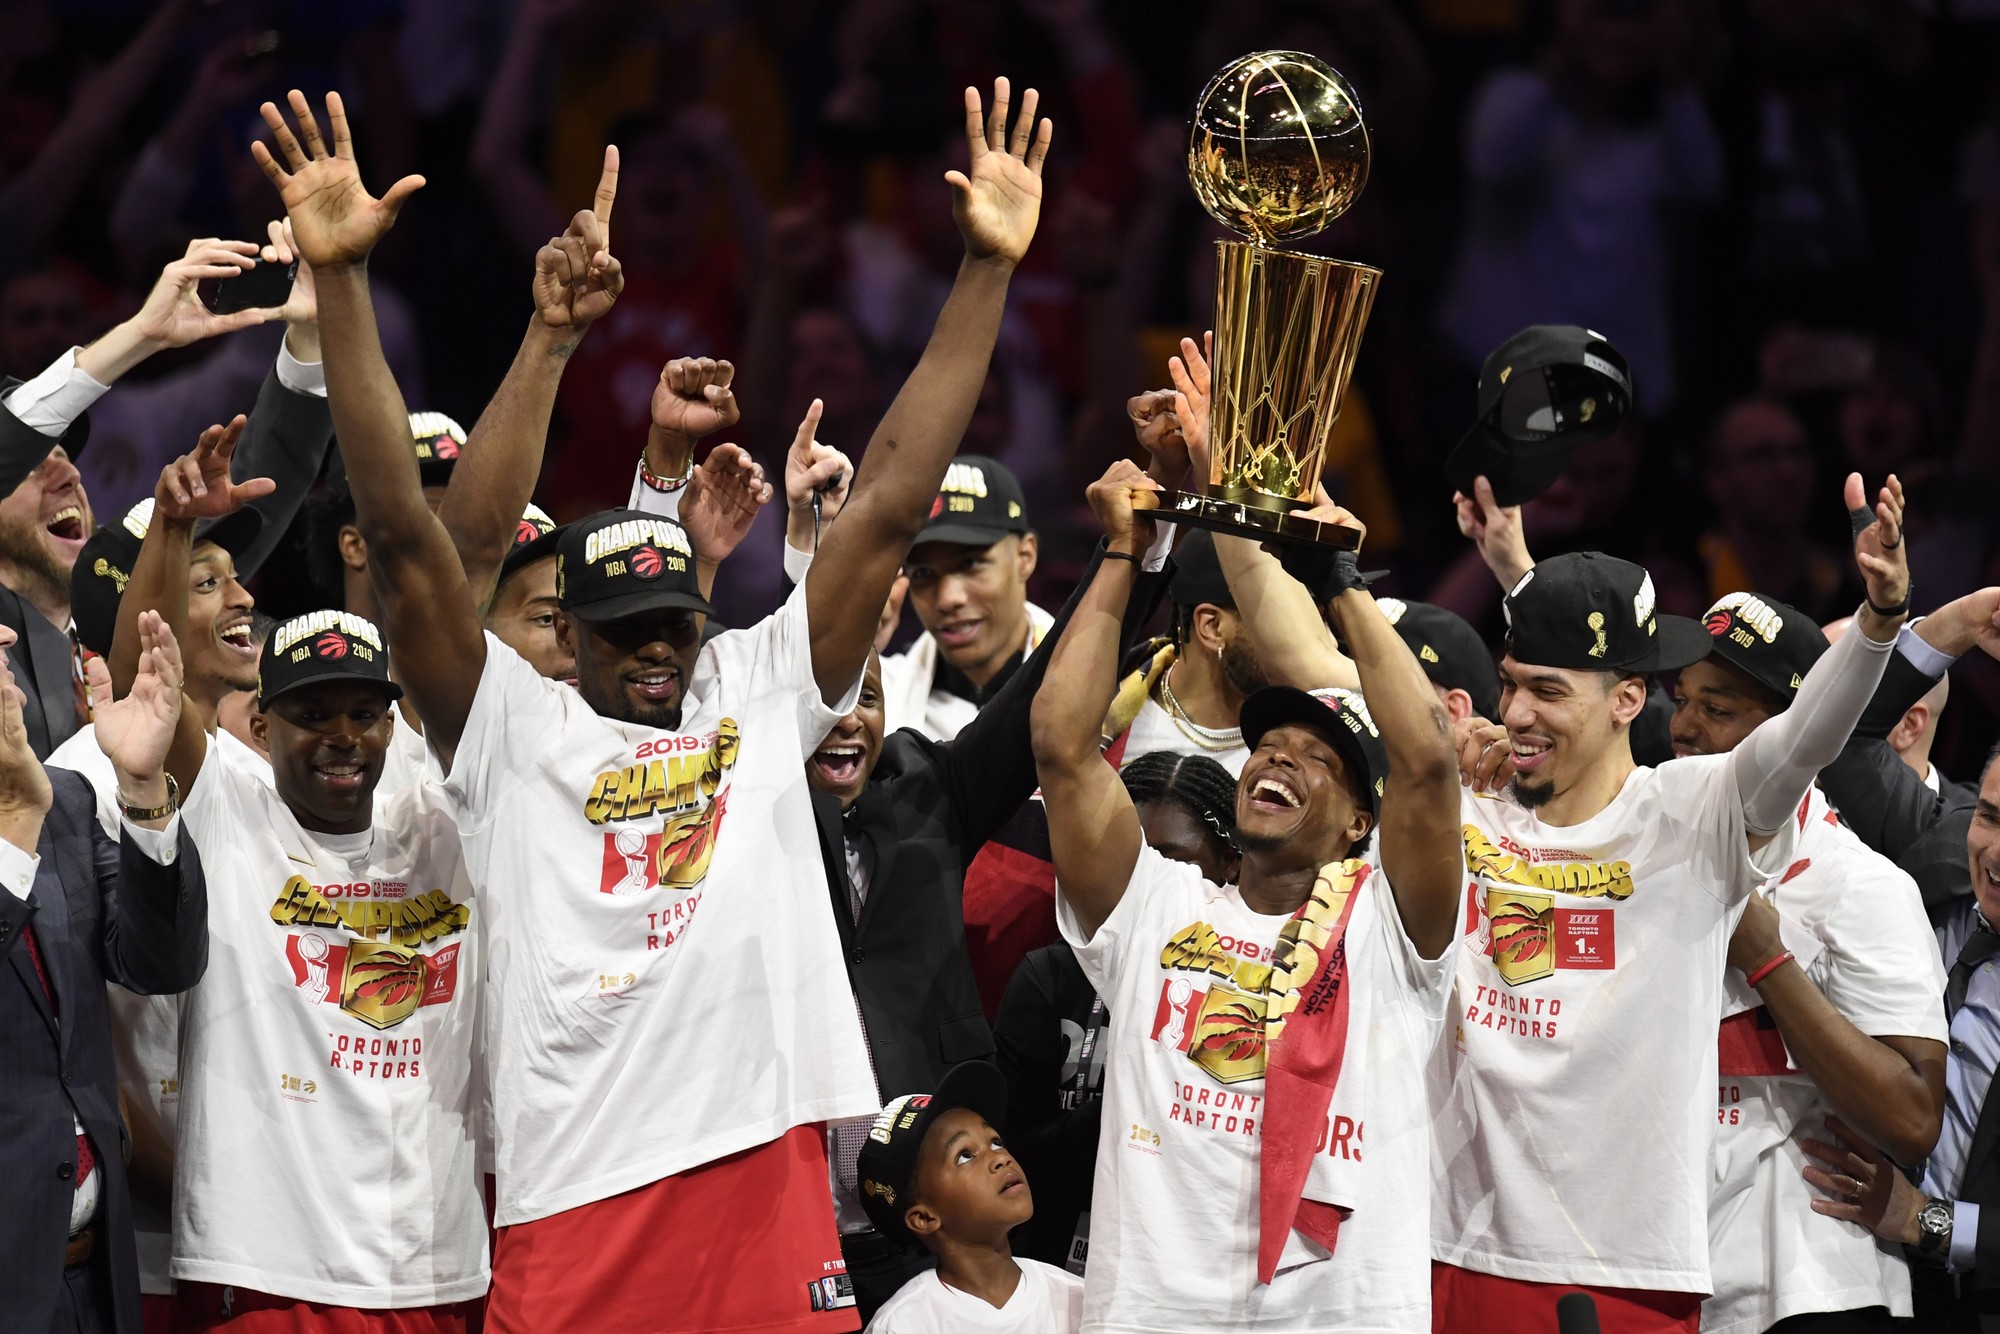 Toronto Raptors guard Kyle Lowry, centre left, holds Larry O'Brien NBA Championship Trophy after defeating the Golden State Warriors basketball action in Game 6 of the NBA Finals in Oakland, Calif. on Thursday, June 13, 2019. Raptors have won their first NBA title in franchise history. THE CANADIAN PRESS/Frank Gunn